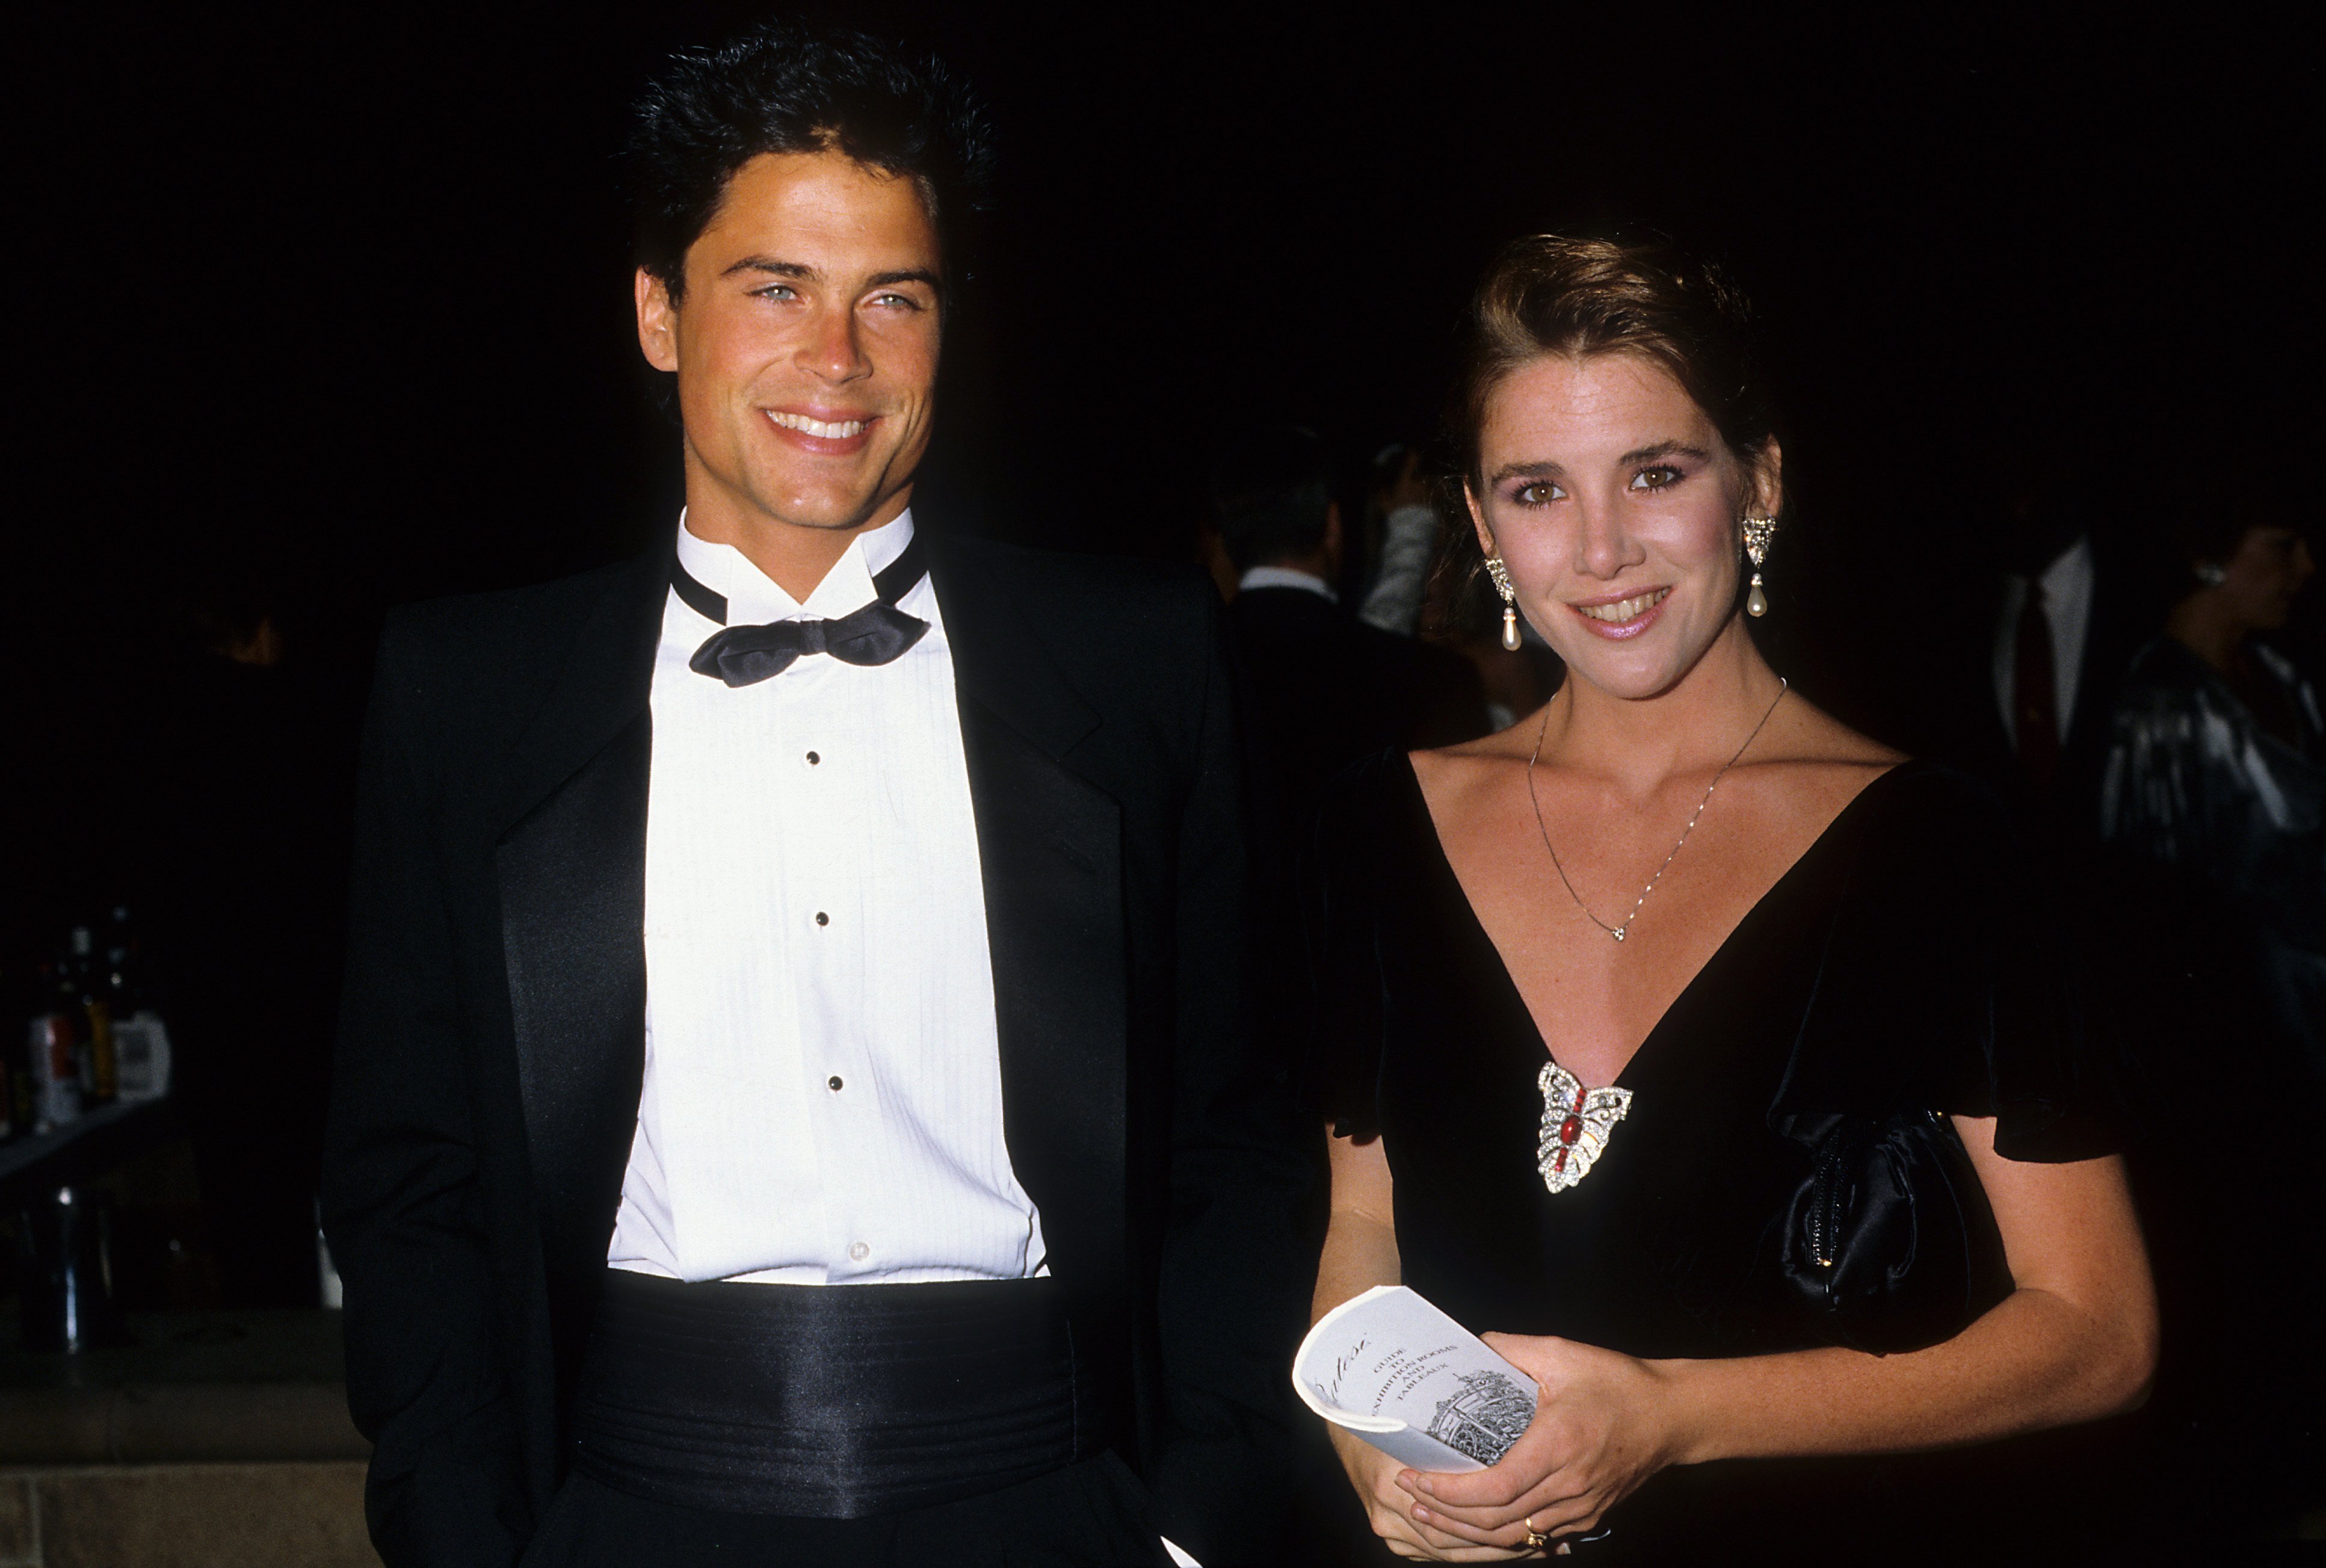 Actor Rob Lowe and actress Melissa Gilbert pose for a portrait in 1987 in Los Angeles, California